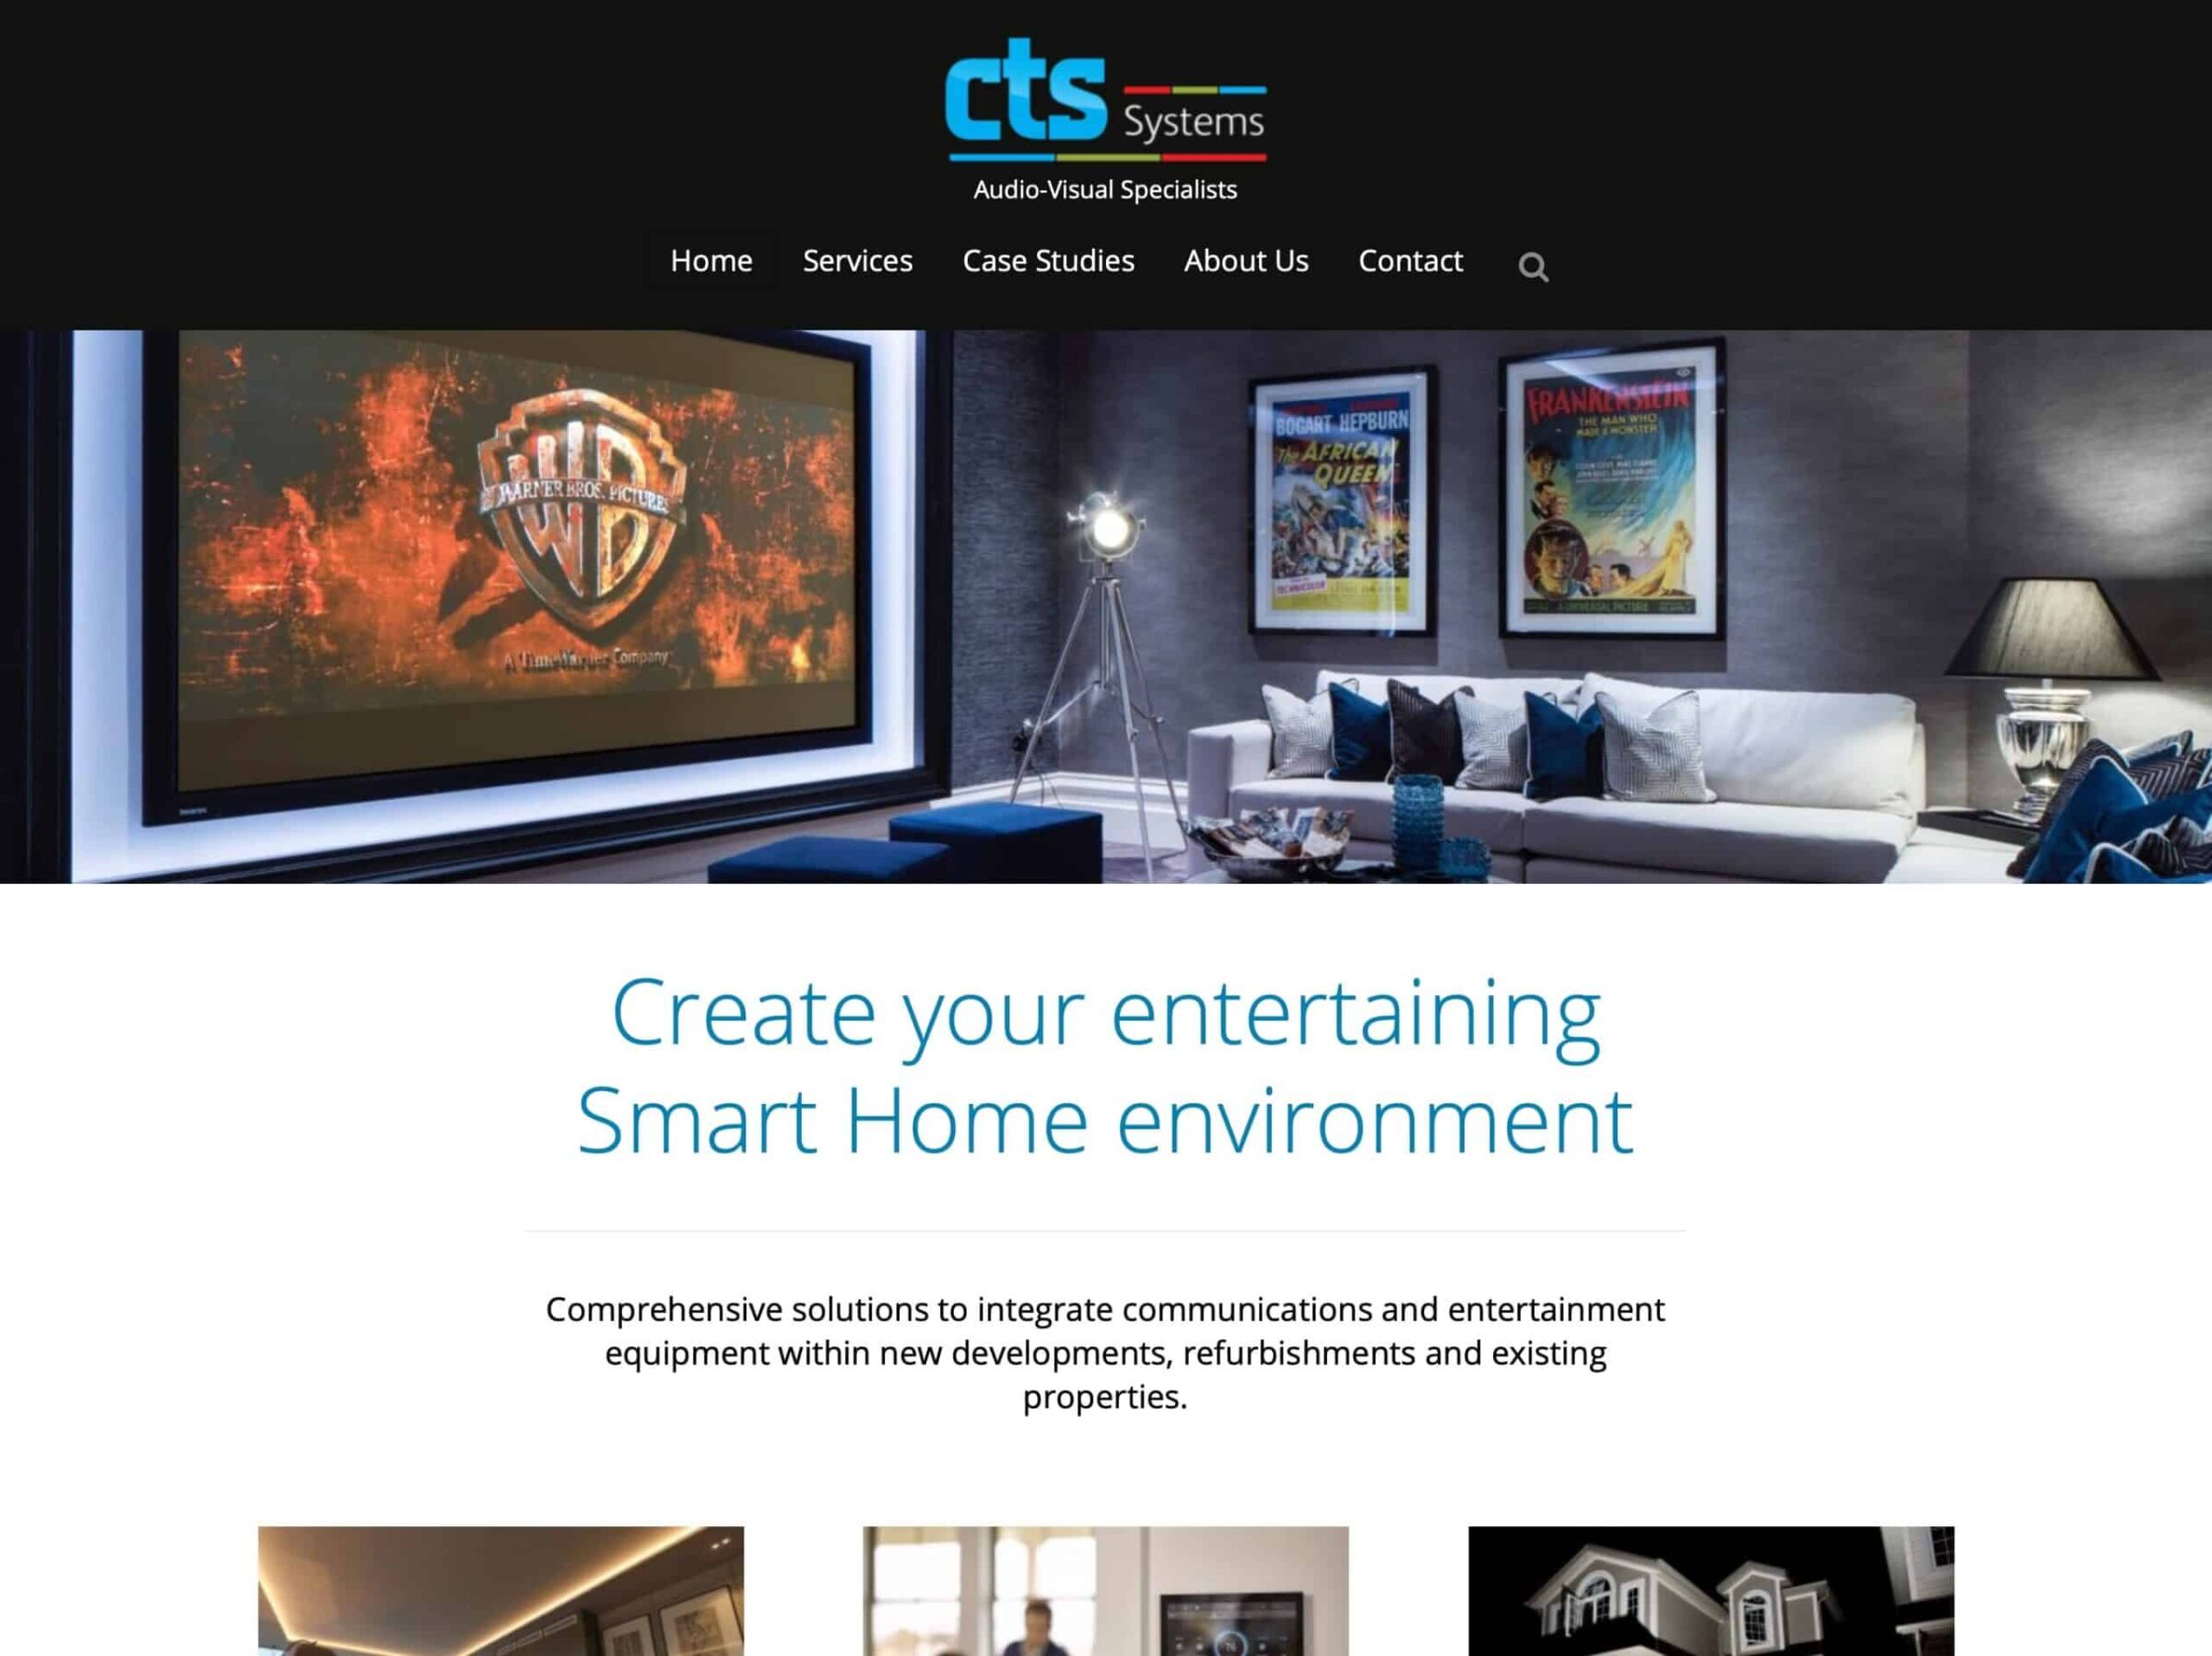 CTS Systems website cts systems.co.uk